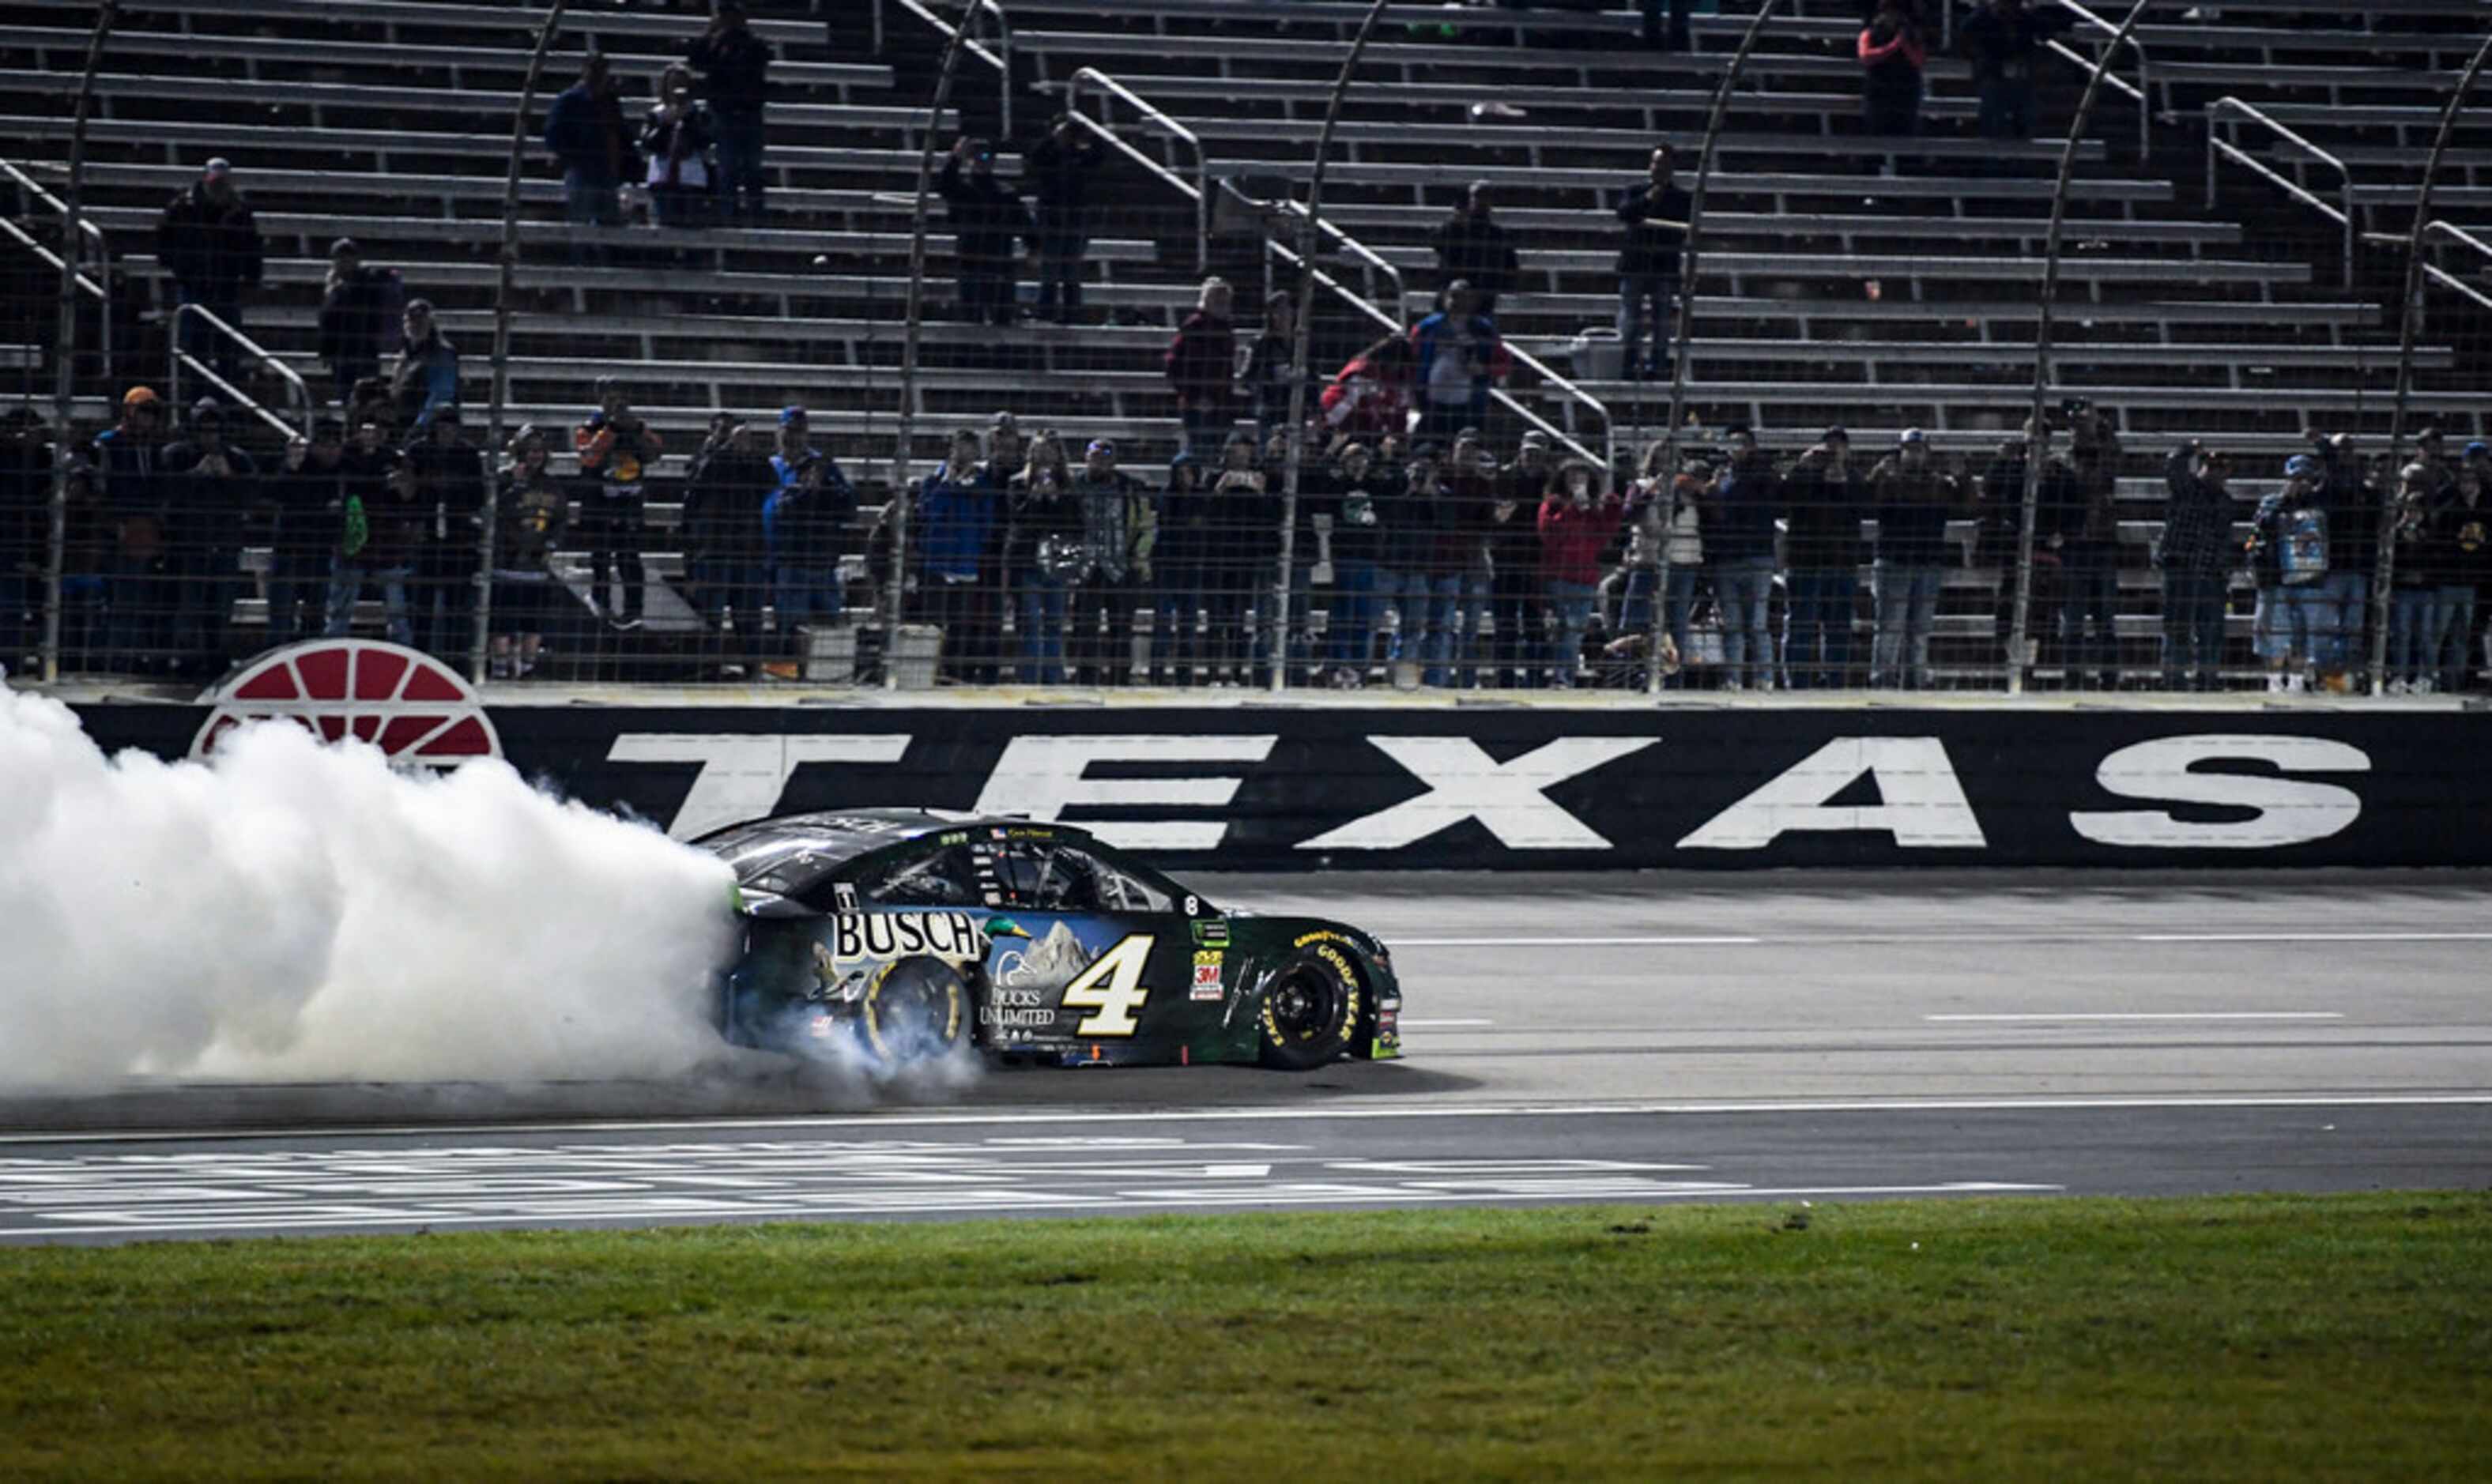 Kevin Harvick (4) celebrates after winning a NASCAR Cup Series auto race with a burnout at...